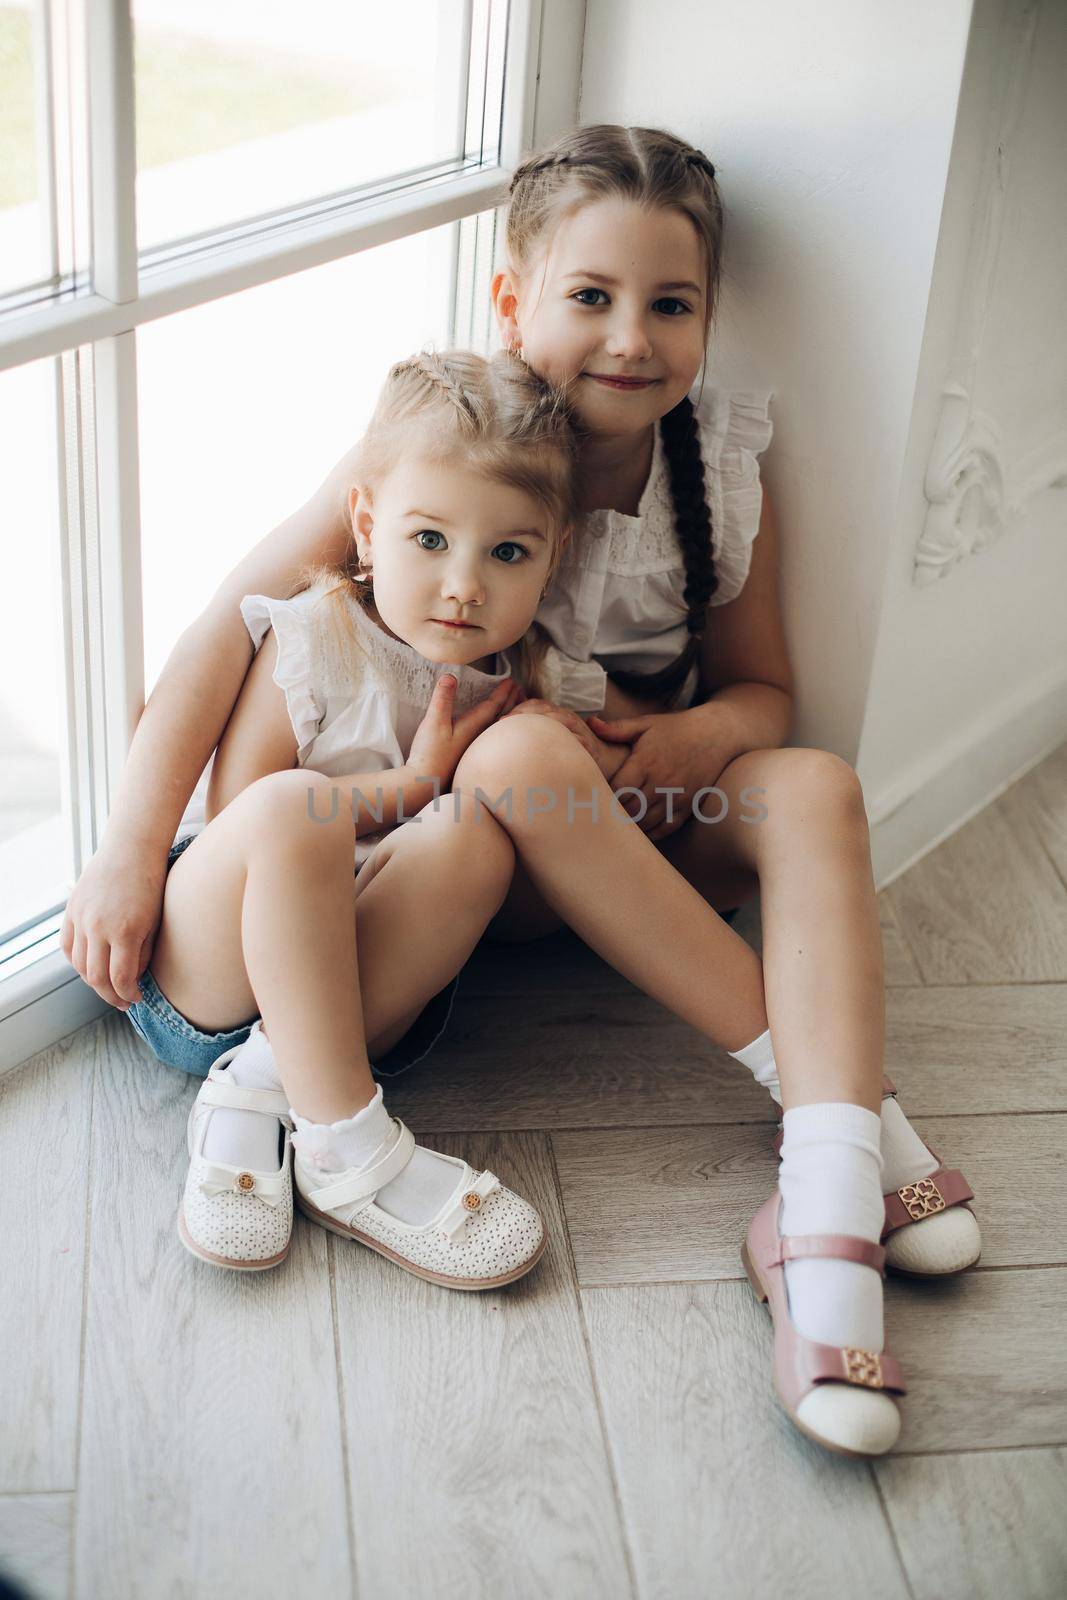 View from above of two beautiful sisters sitting together near window and hugging each other. Cute girls looking at camera, smiling and posing at home. Concept of childhood and family.